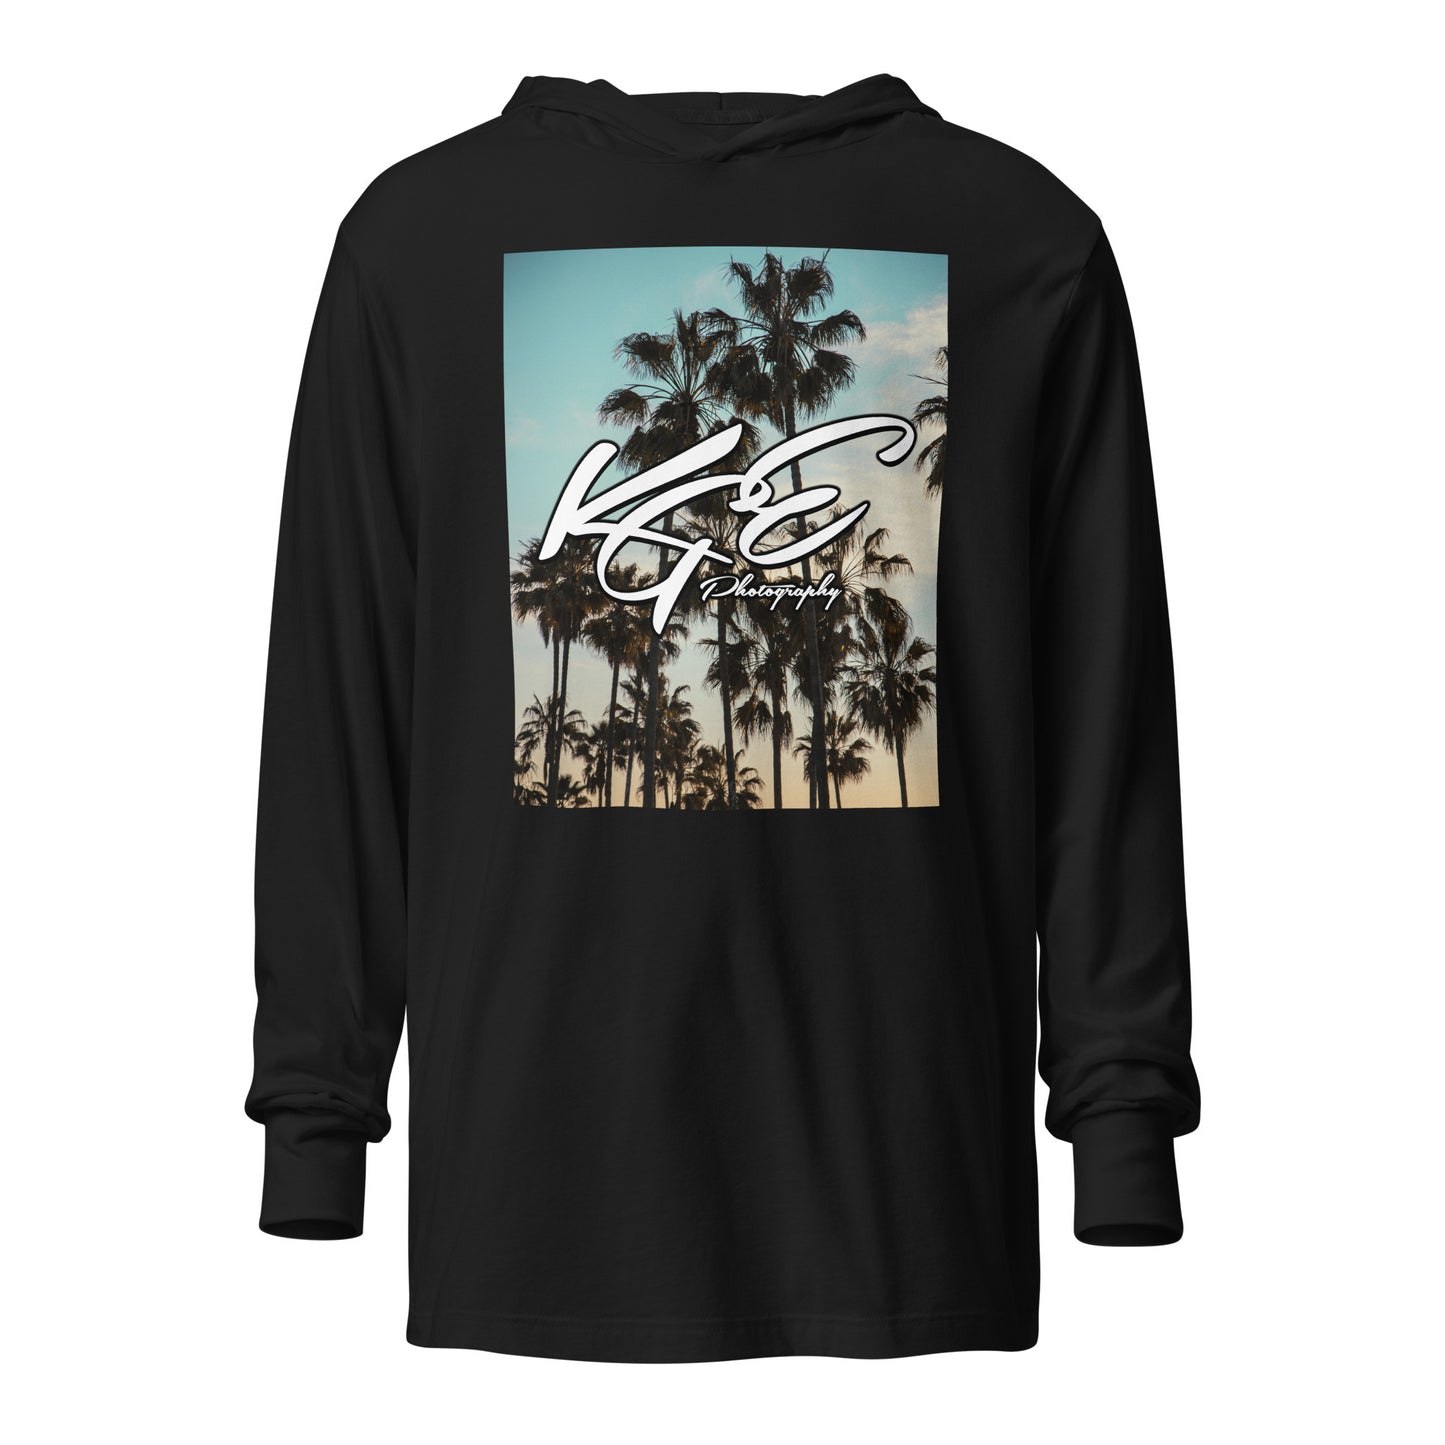 (New) KGE Photography Paradise Hooded long-sleeve tee